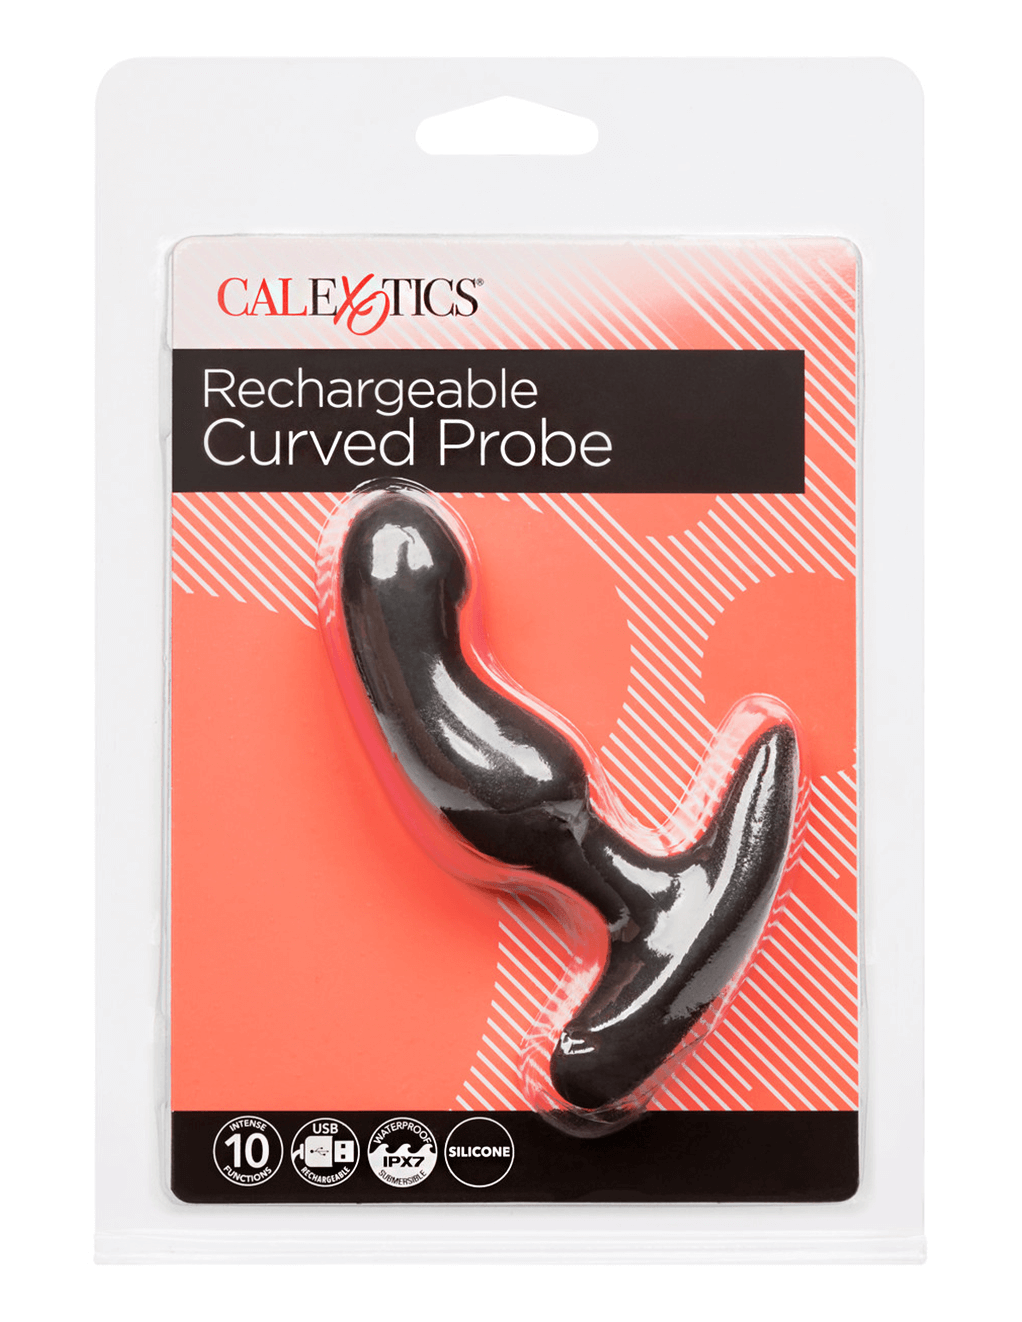 Rechargeable Curved Probe - Box Front